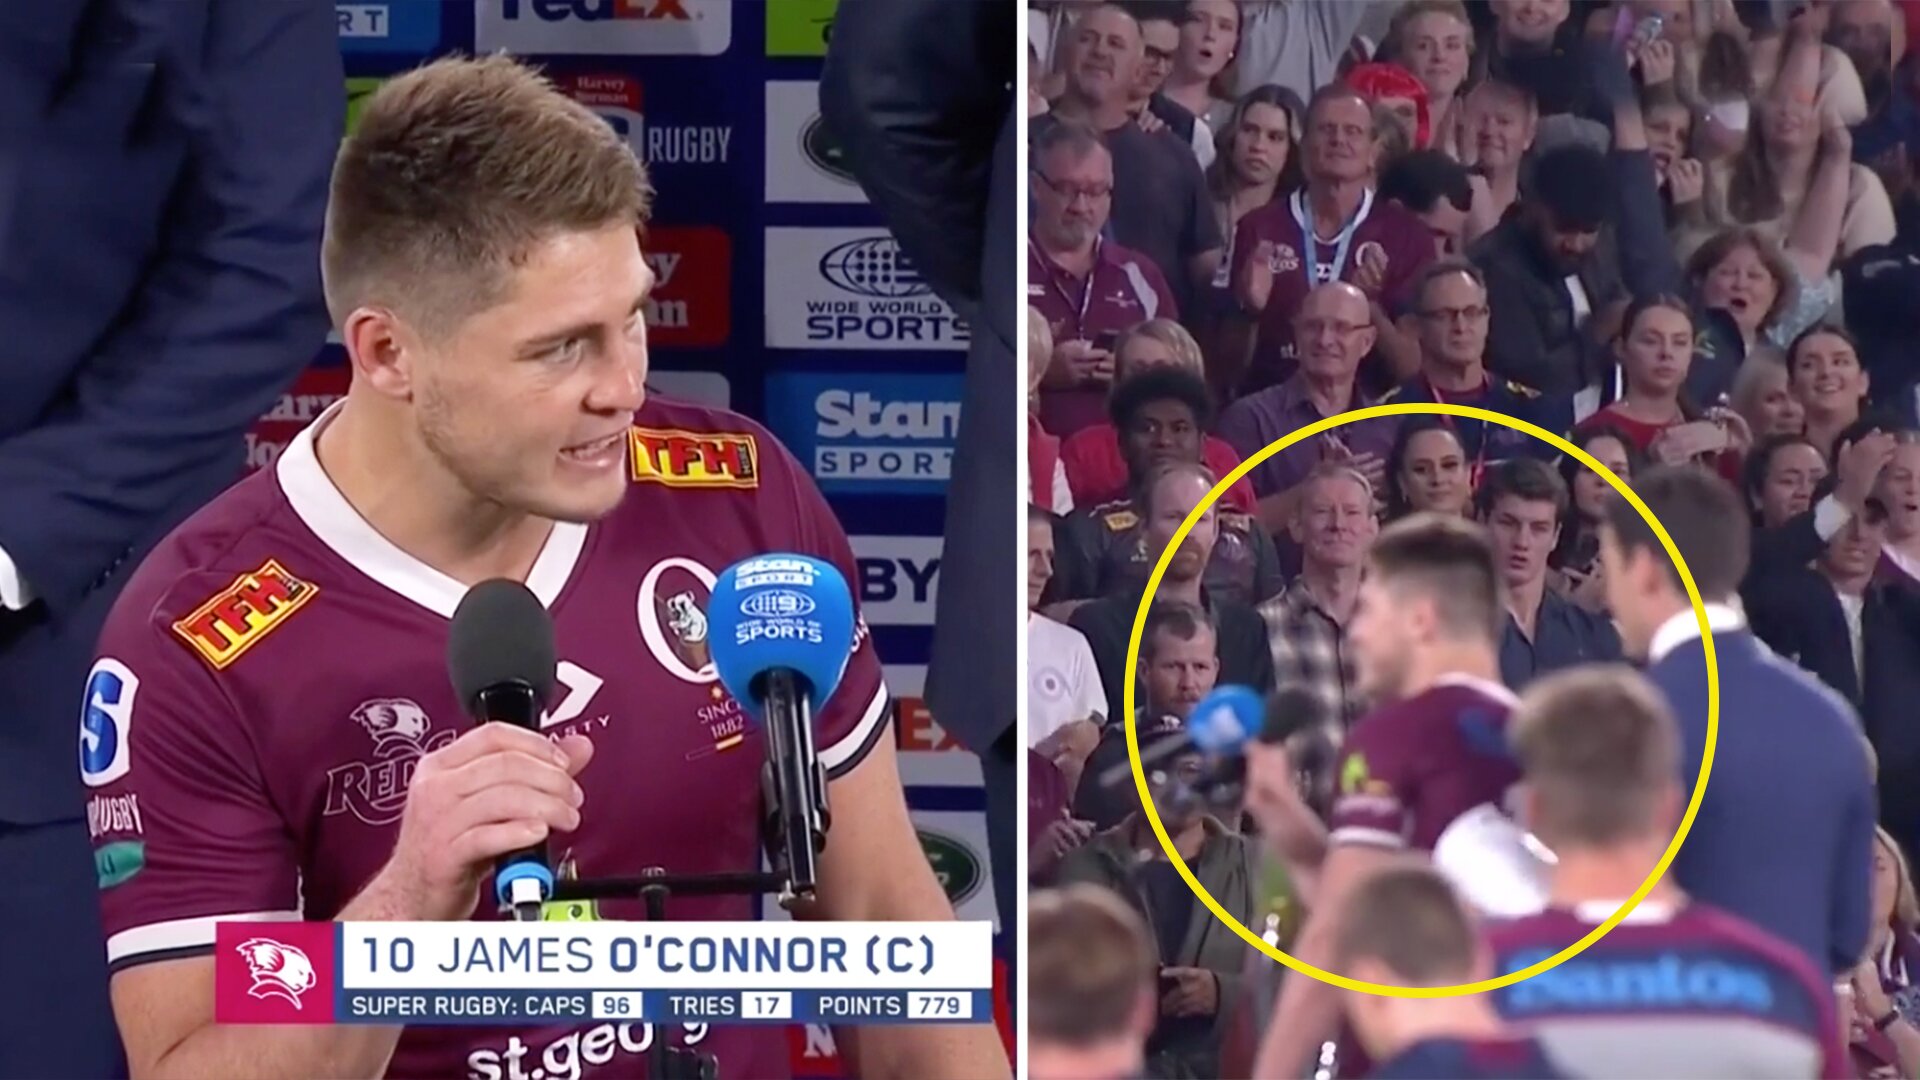 'How ****ing good!' - James O'Connor x-rated victory speech riles up Ozzie crowd